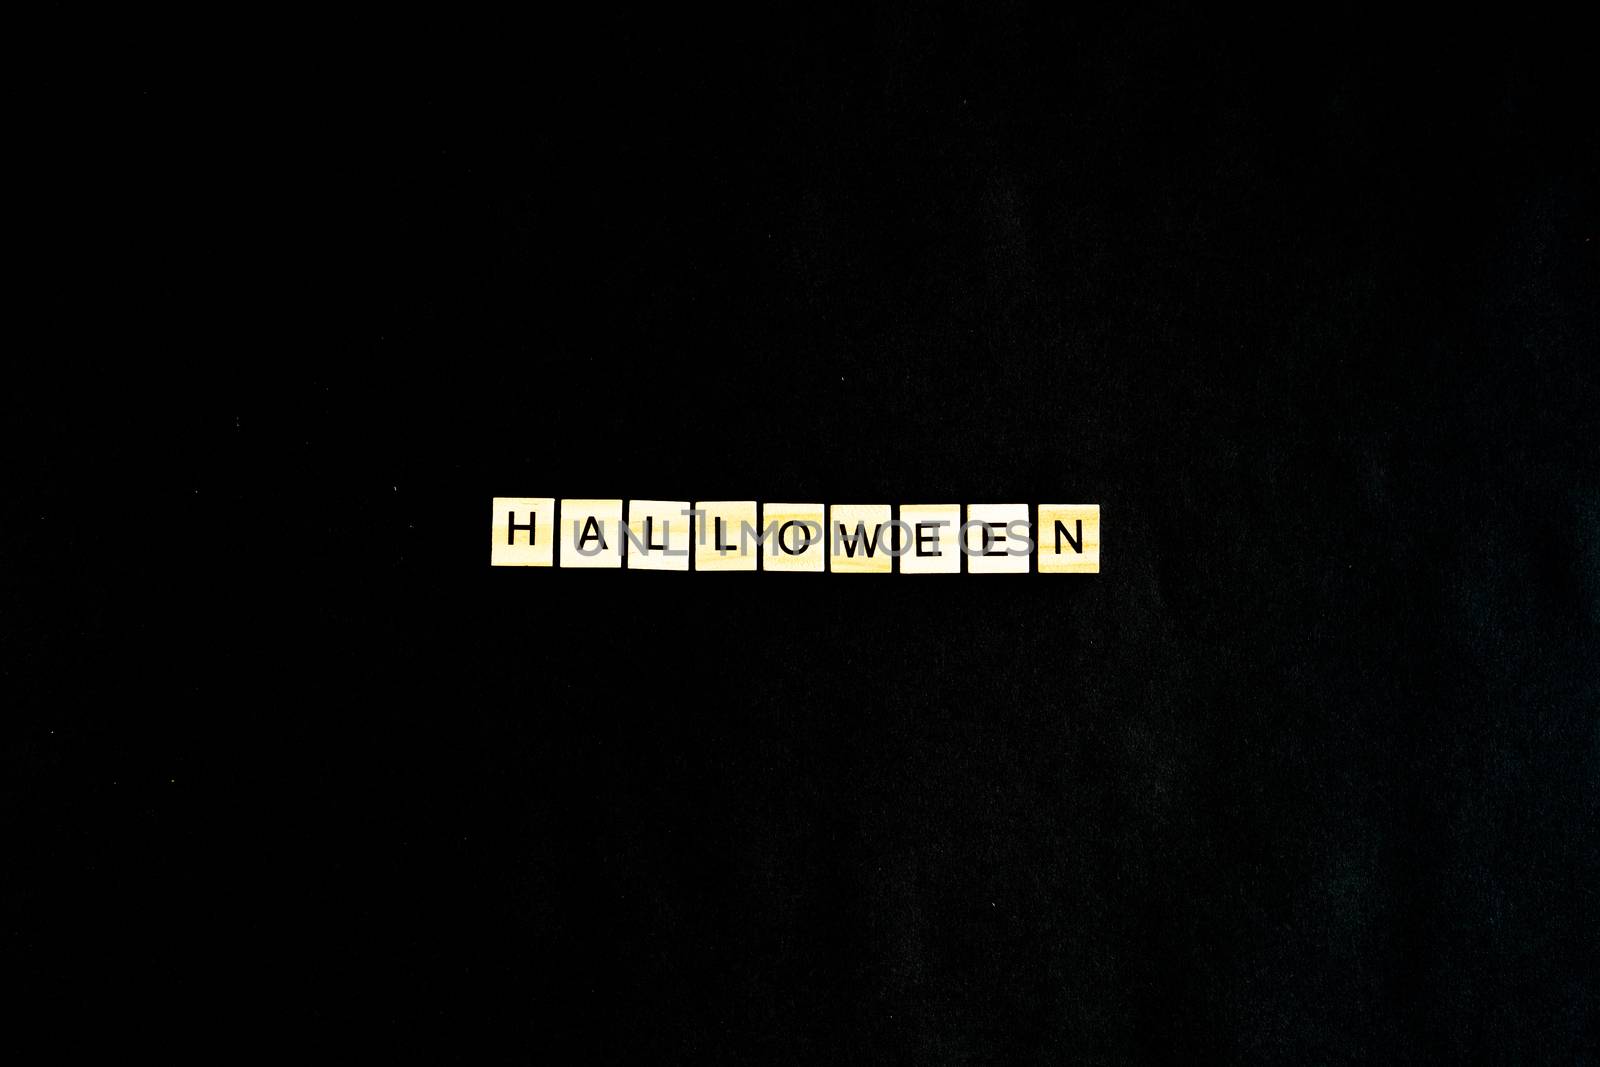 Words Halloween. Wooden blocks with lettering on black background decorated with pumpkins. Top view, flat lay. Happy Halloween.